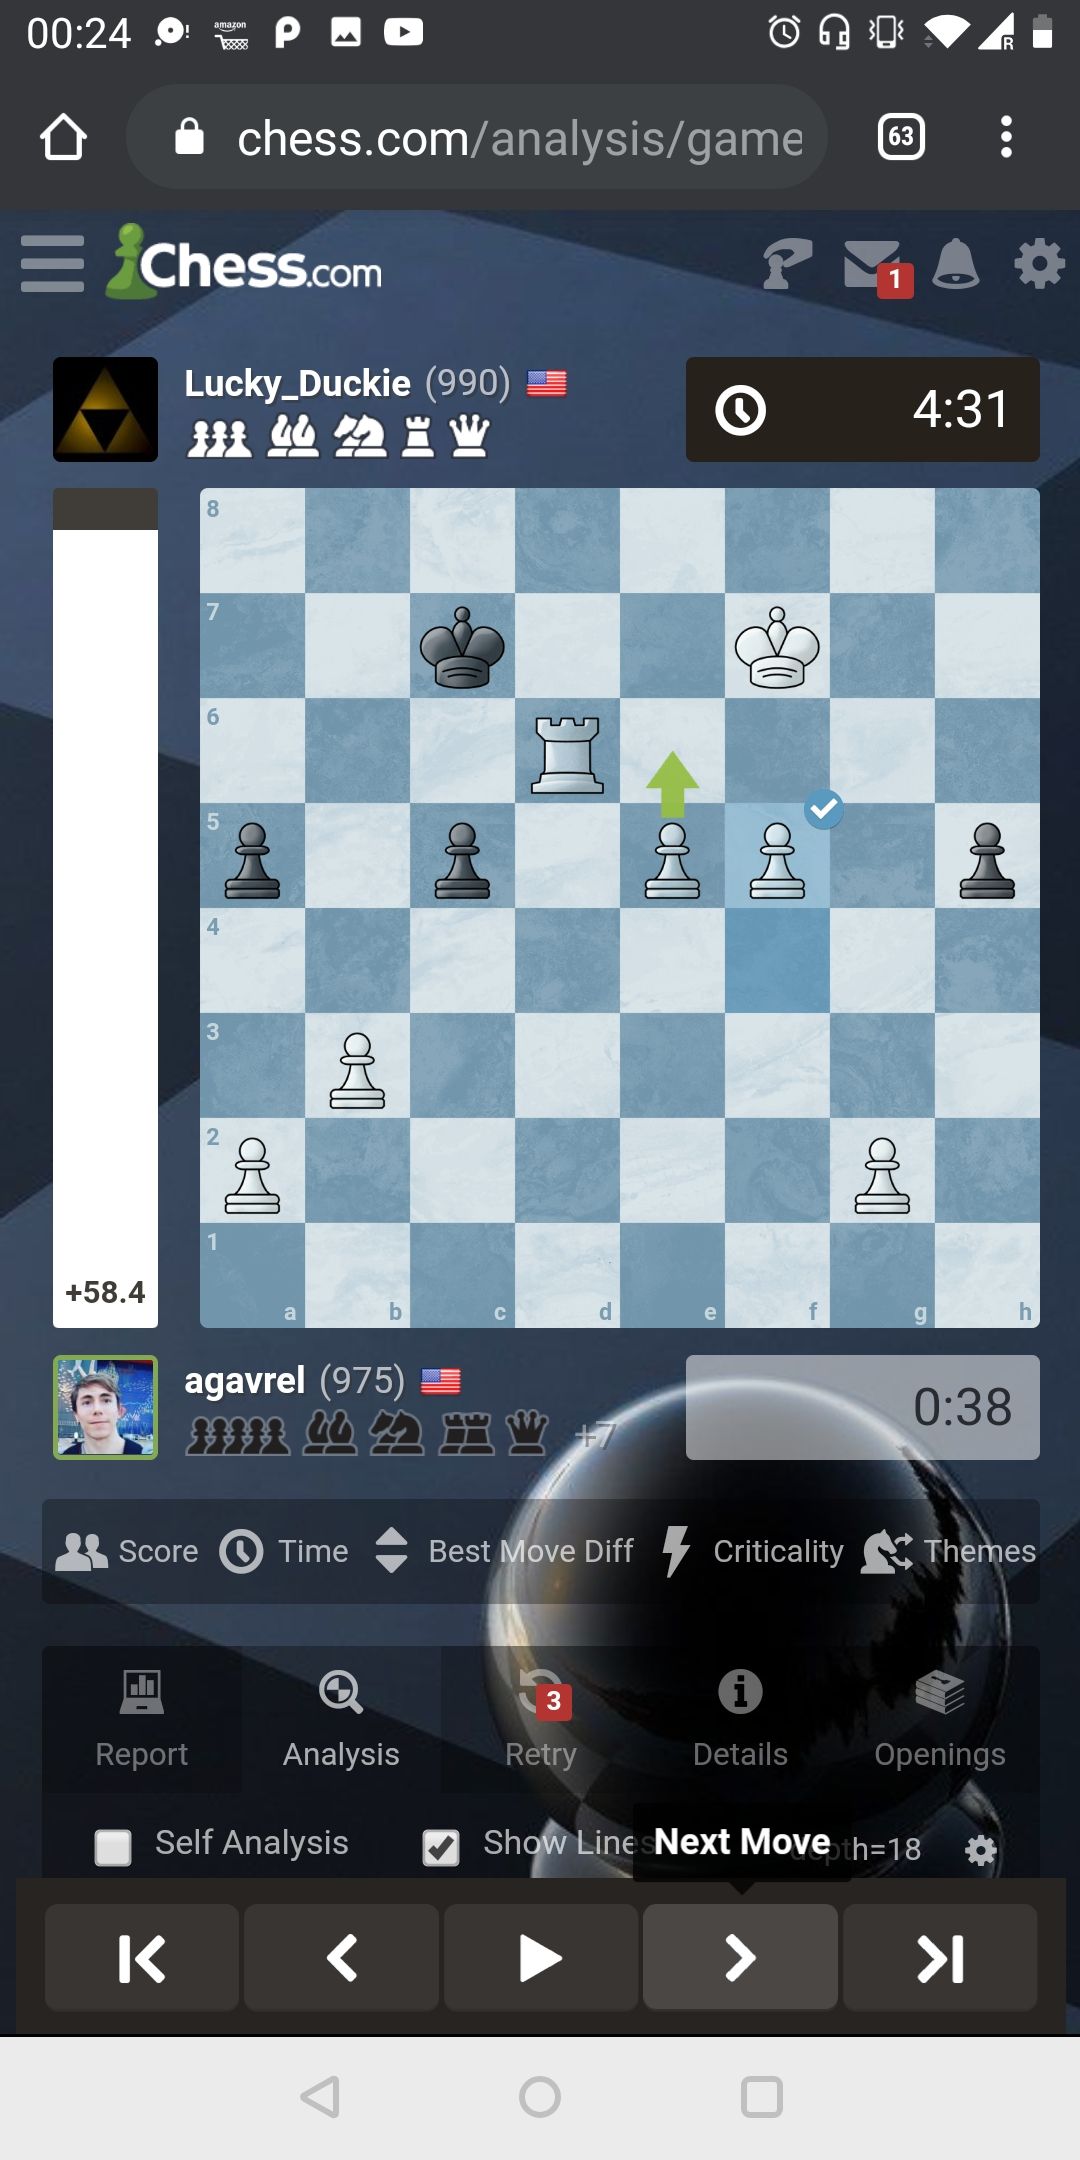 Introducing Chessify's New Feature: Full Game Analysis with Stockfish